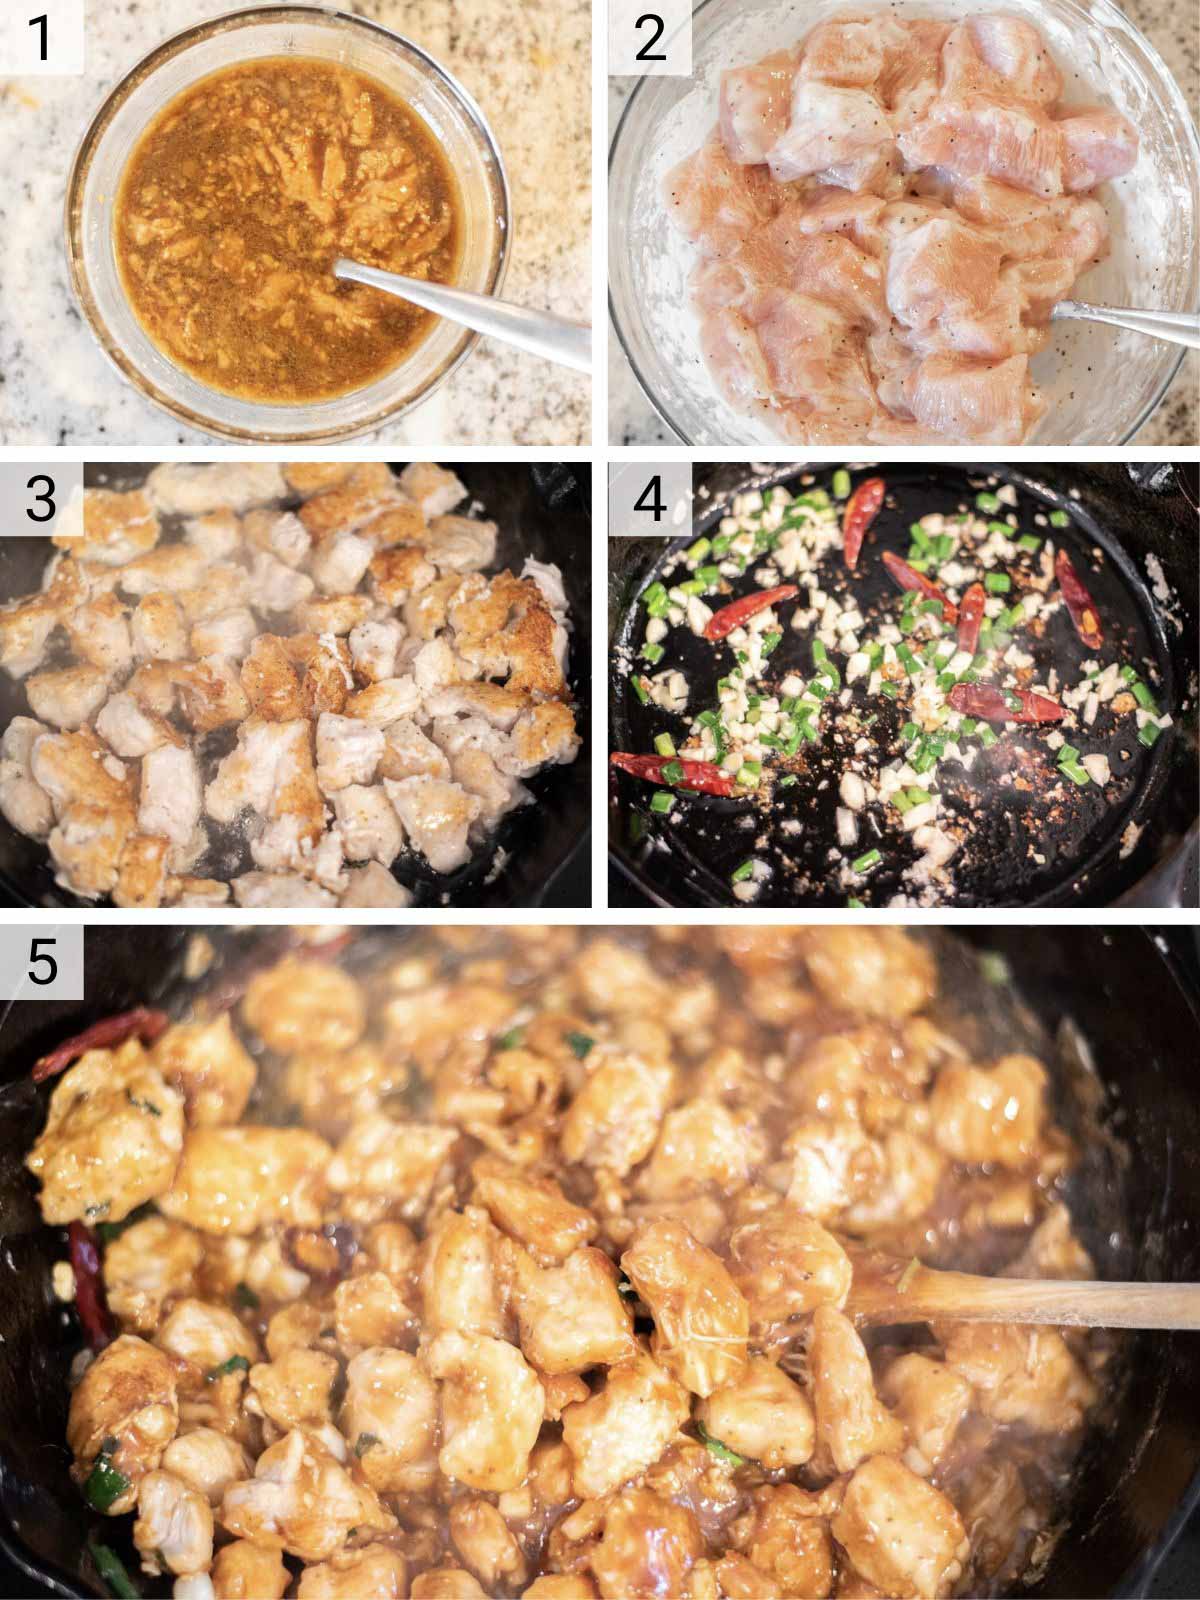 process shots of how to make General Tso's chicken